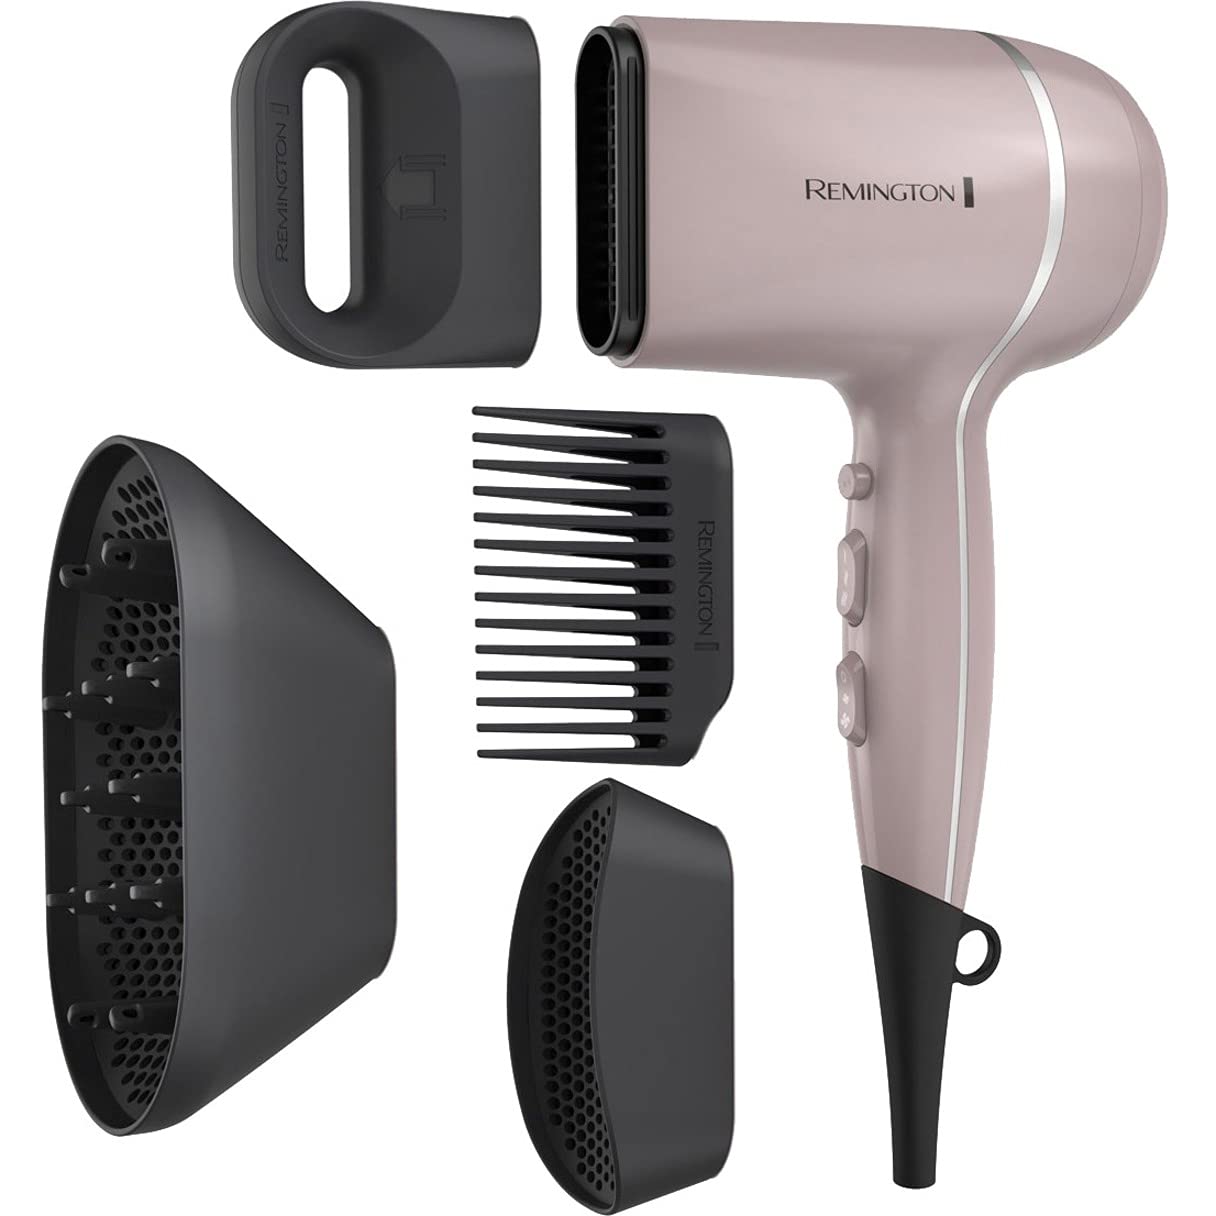 Remington Pro Wet2style Hair Dryer, With Ionic & Ceramic Drying Technology, Mauve, 1875 Watts of Drying Power